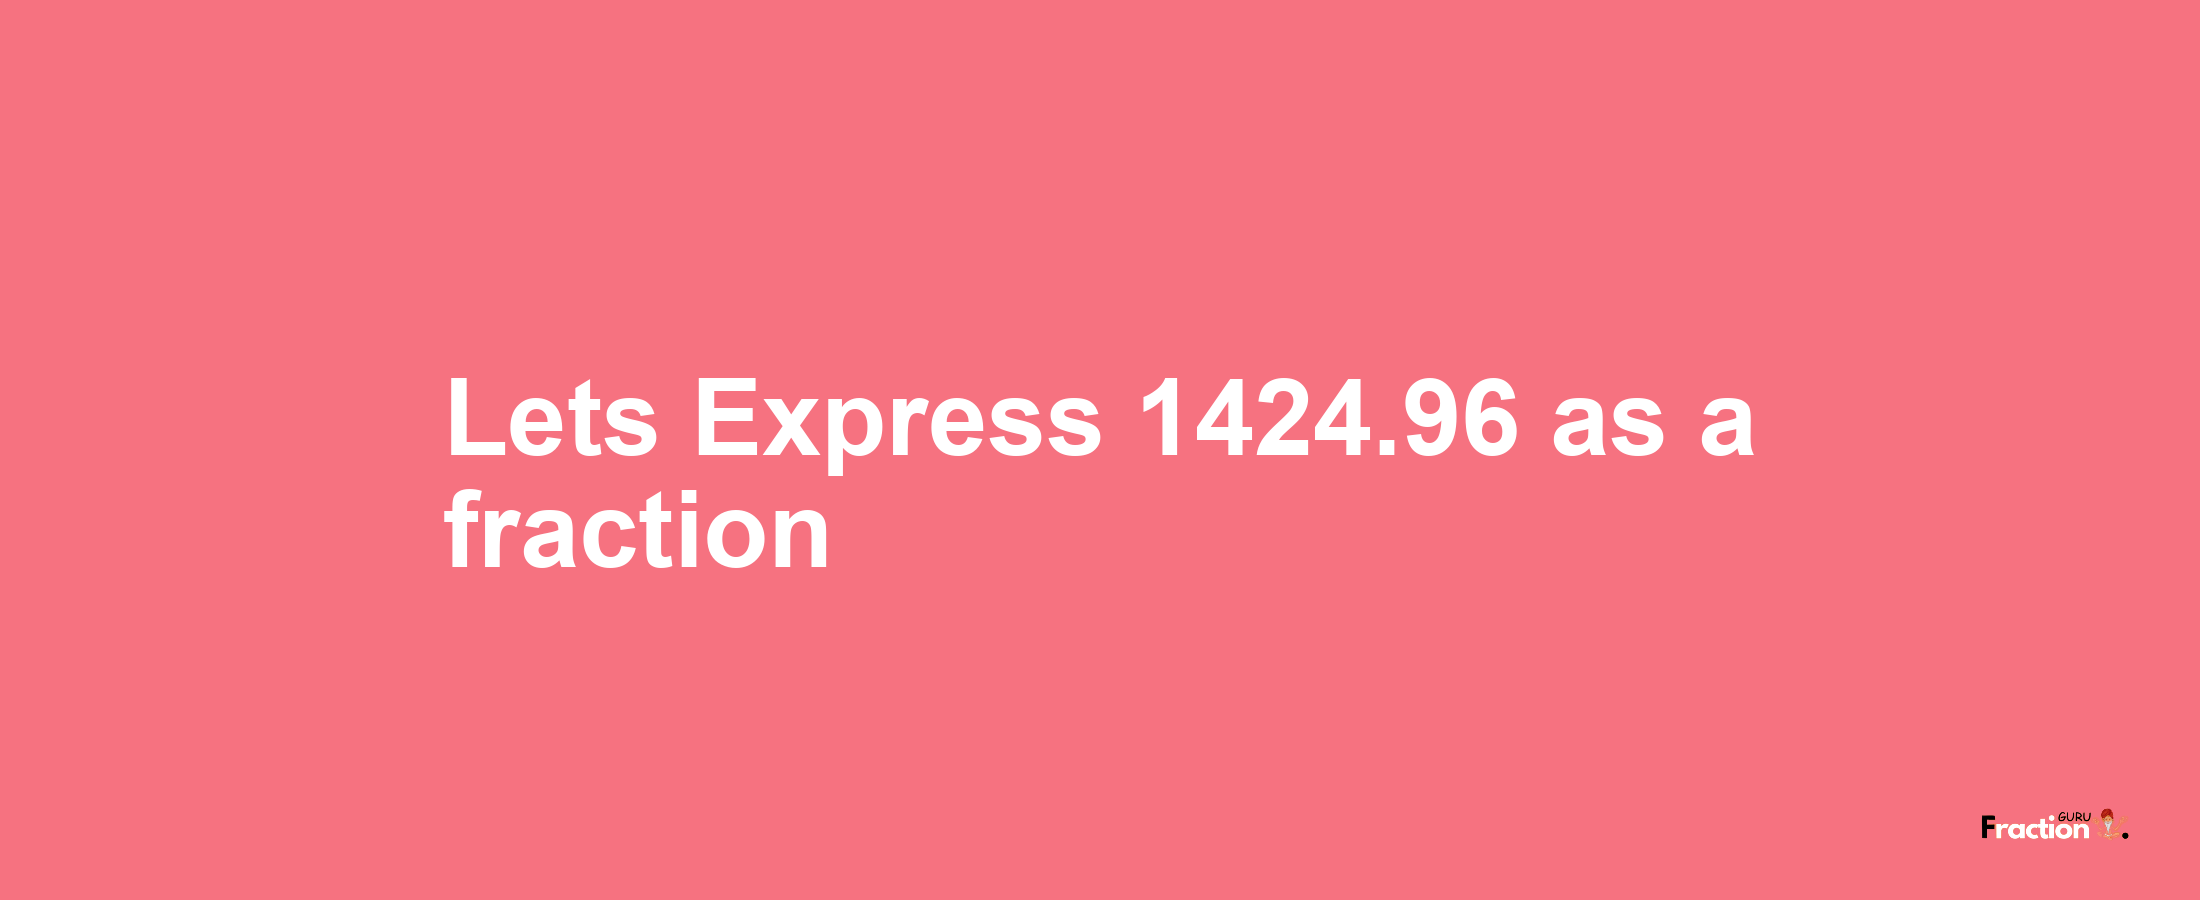 Lets Express 1424.96 as afraction